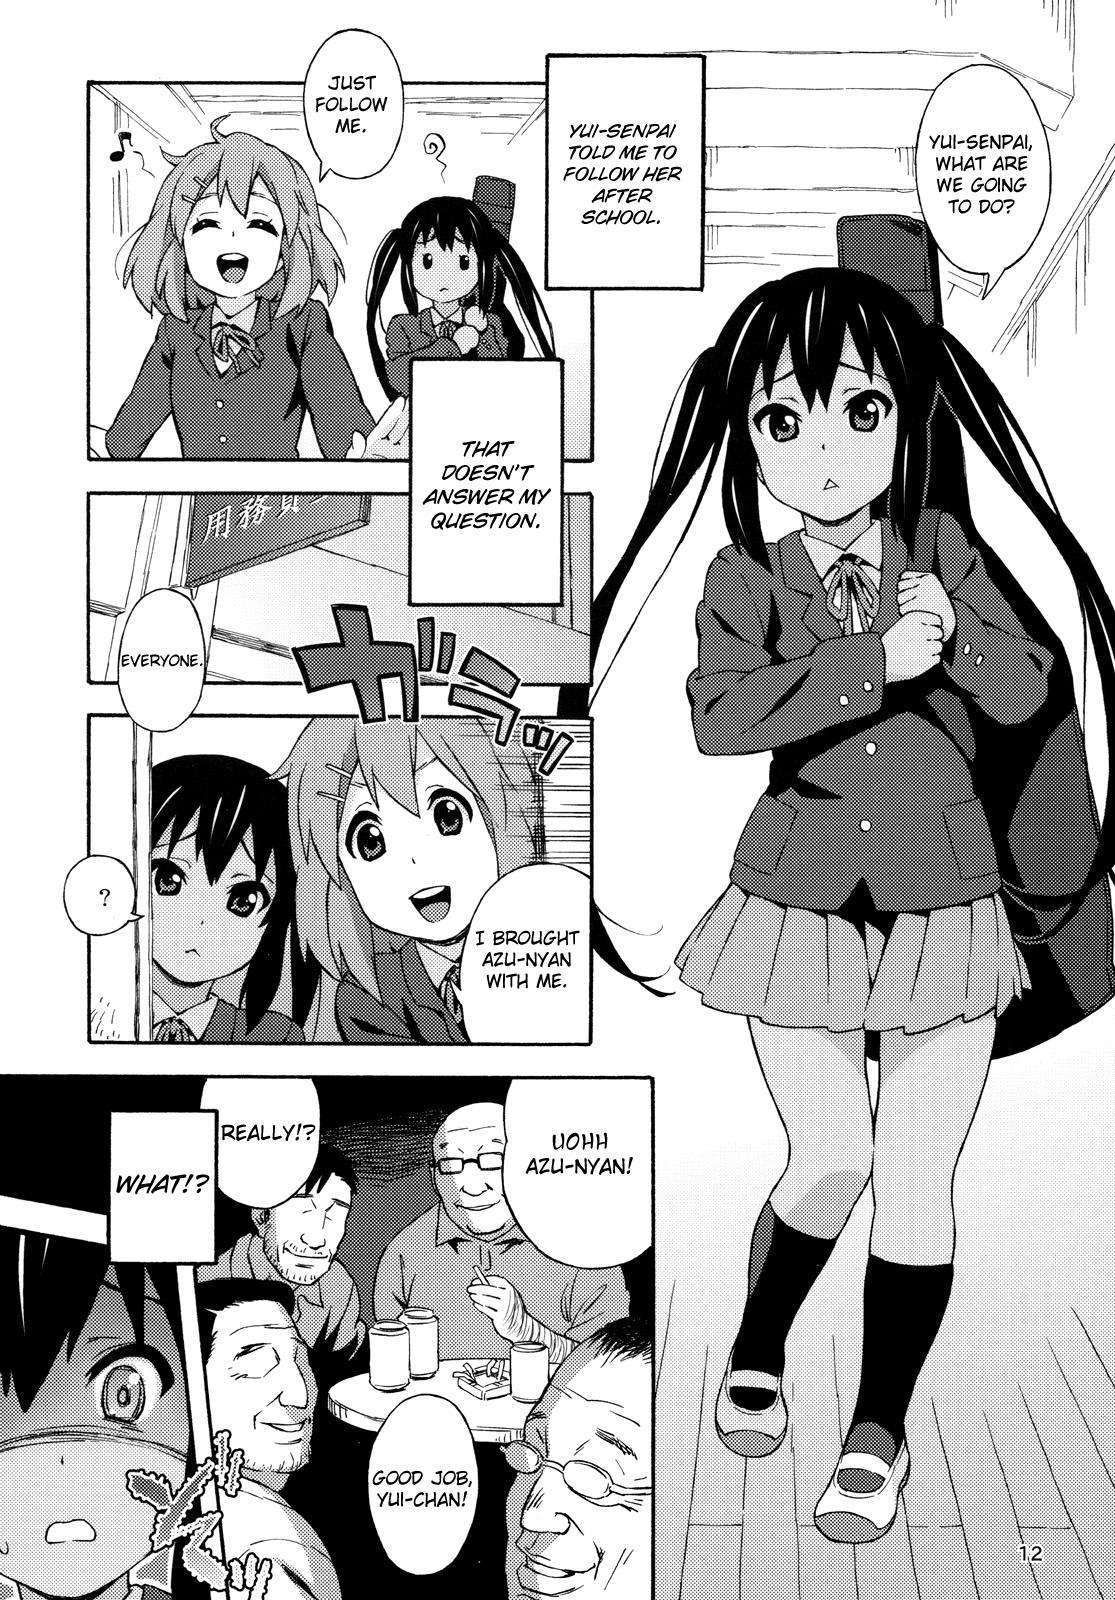 Gostoso fortissimo - K-on Shaved - Page 12